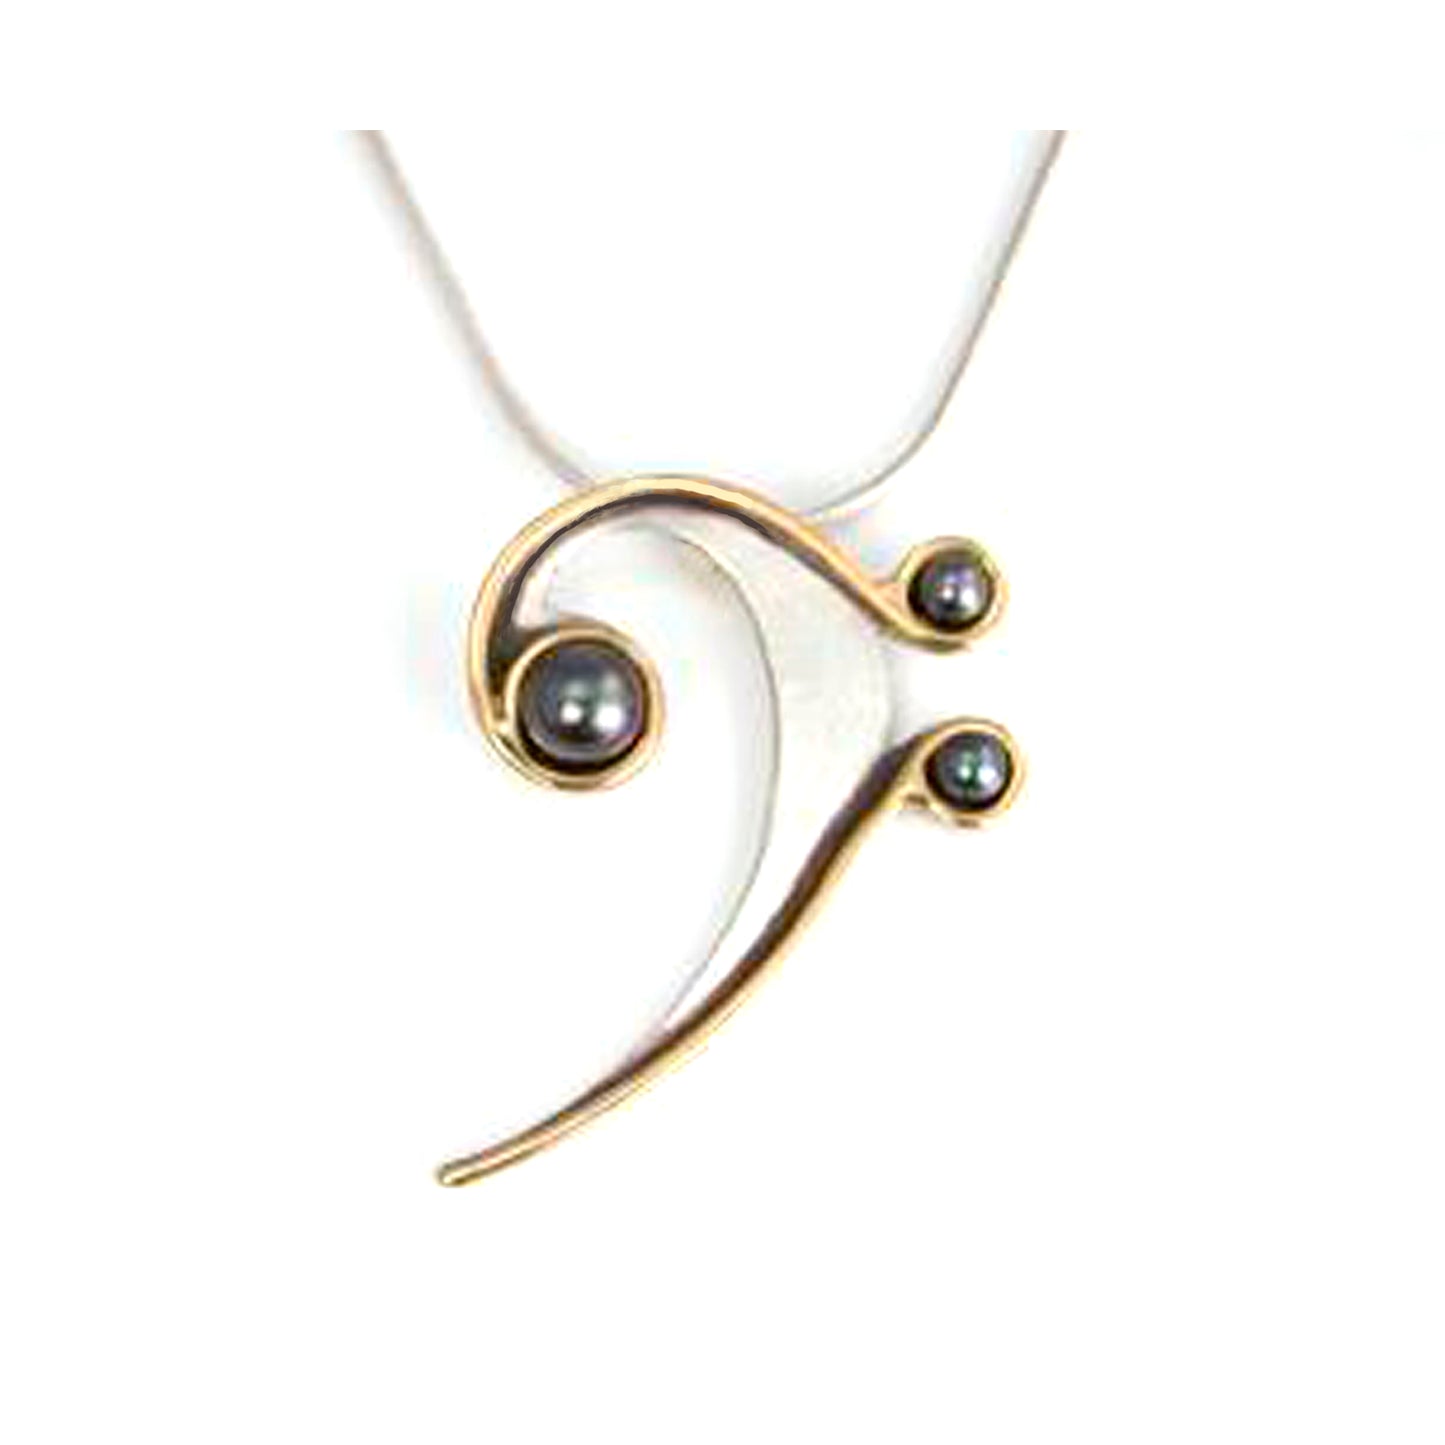 Base clef pendant in 18kt yellow gold , sterling silver, and black pearls by ZEALmetal, Nicole Horlor, in Kingston, ON, Canada